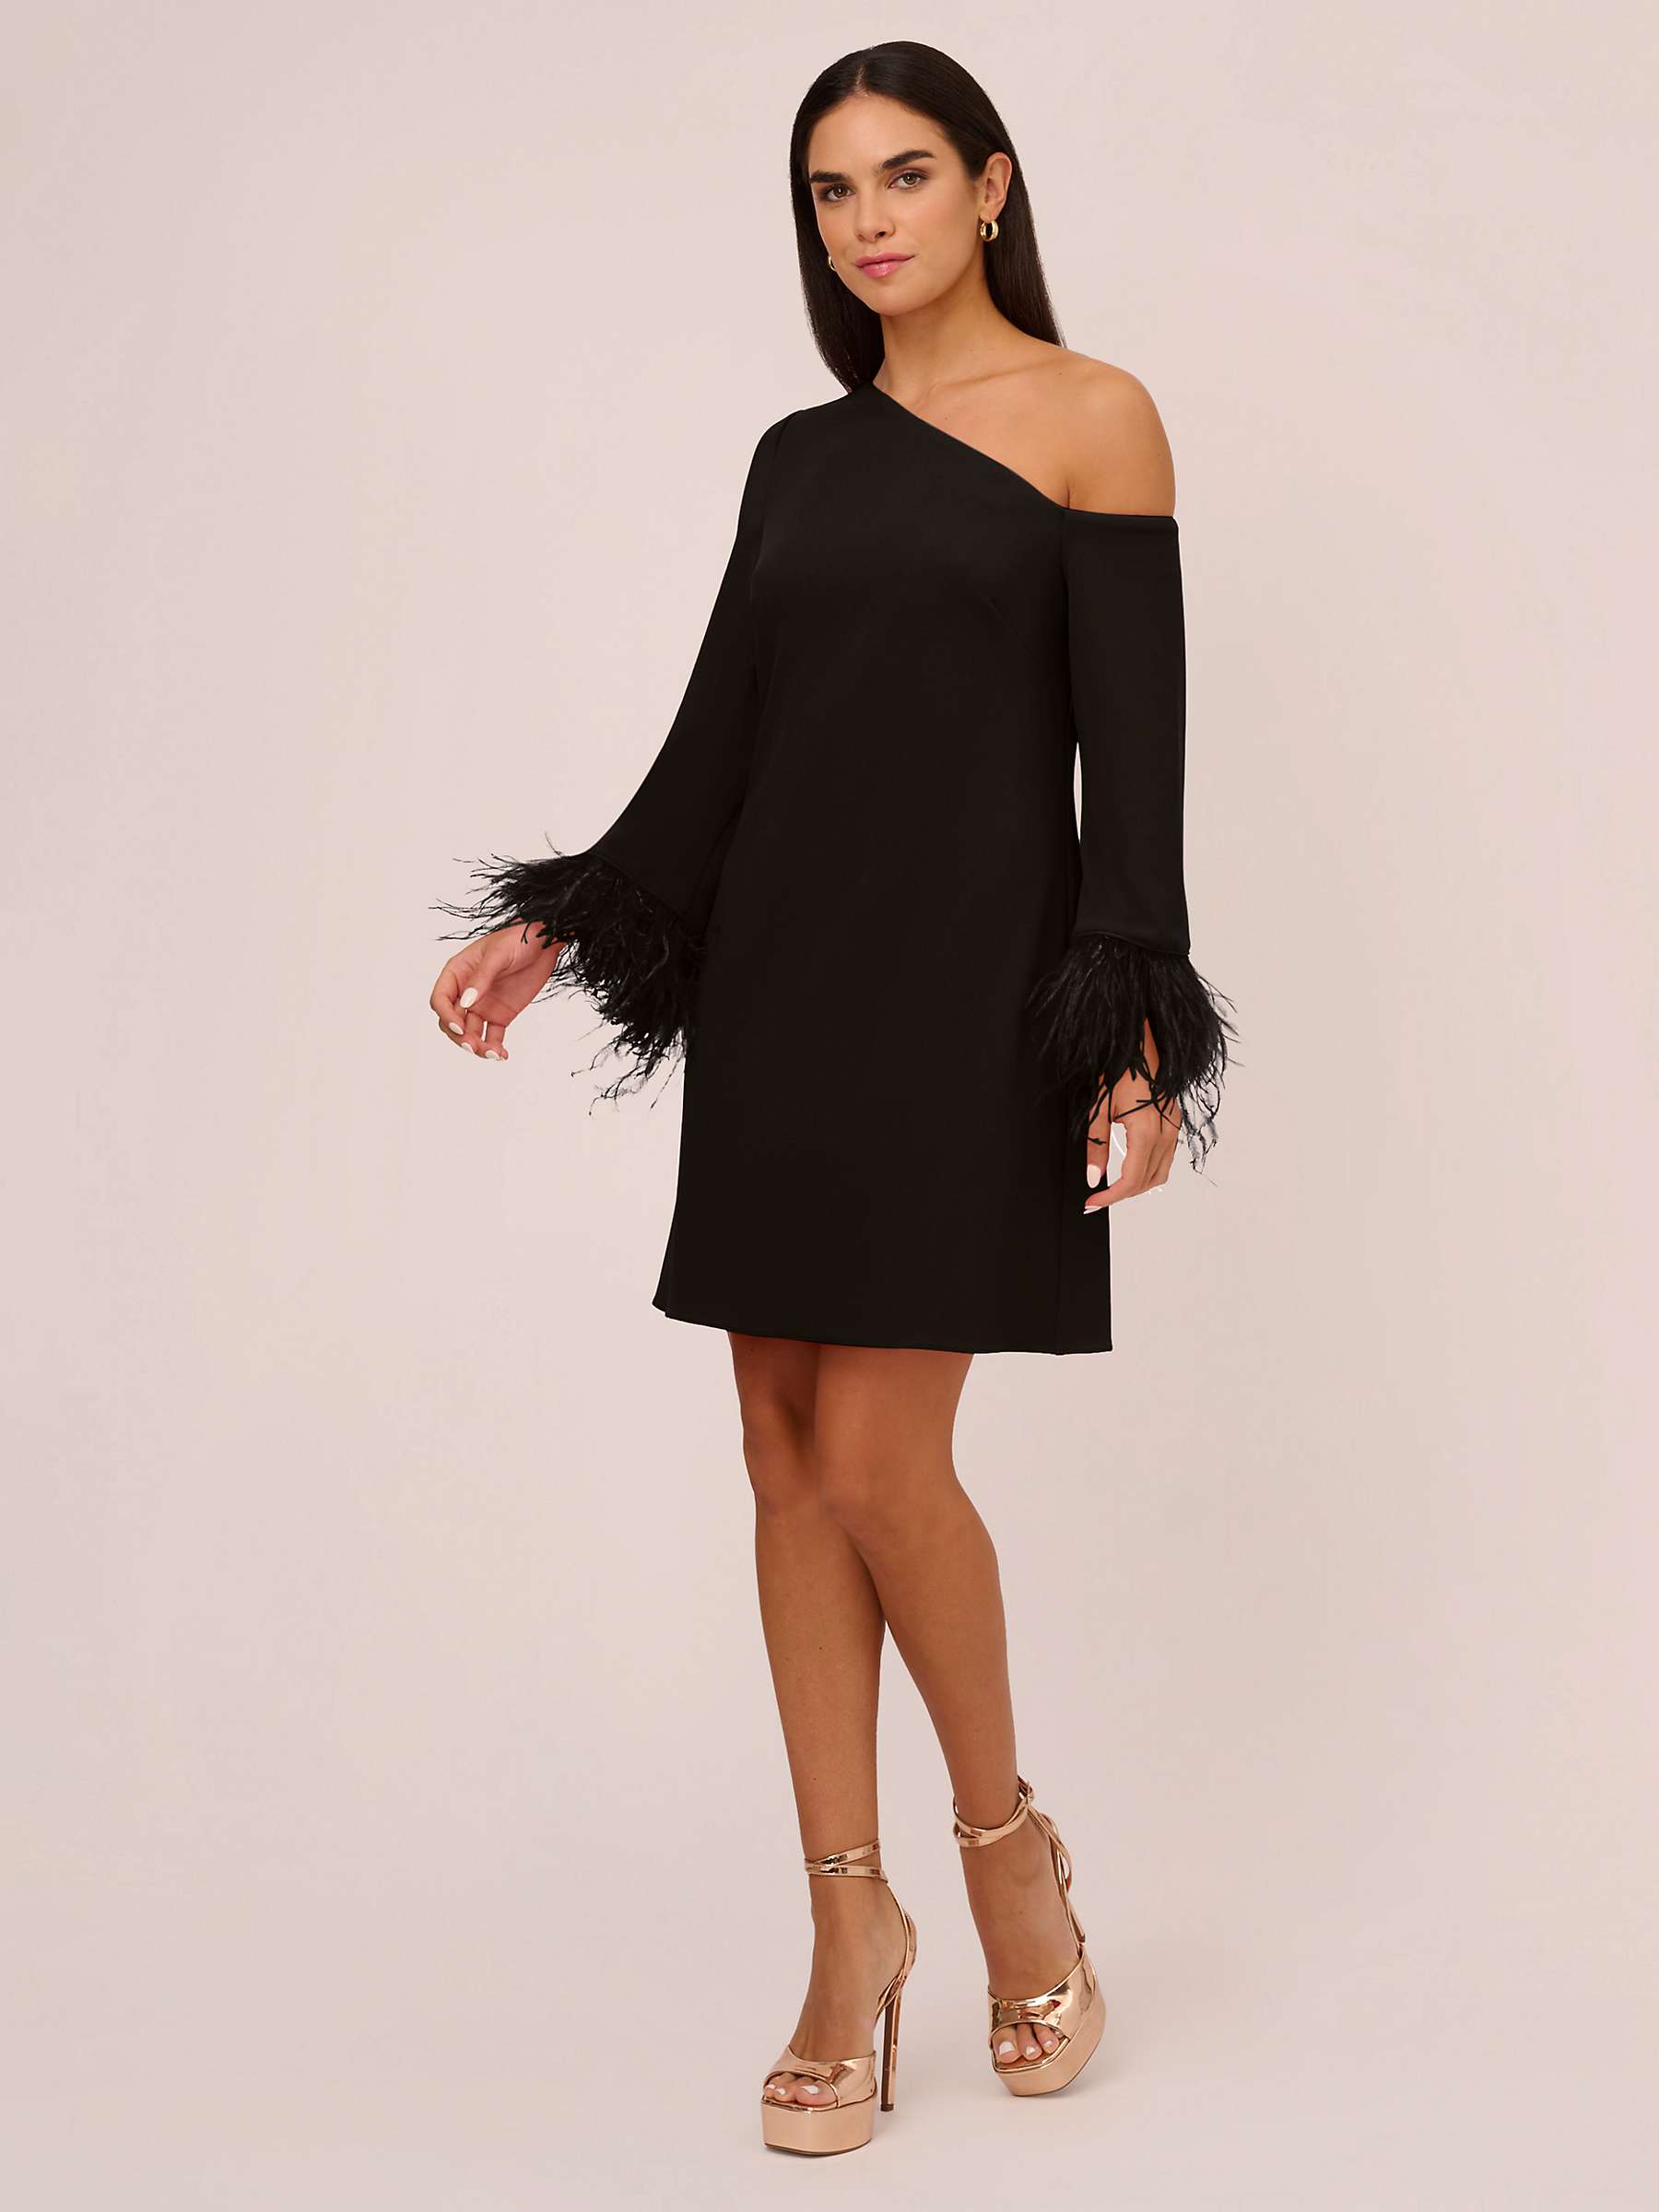 Buy Adrianna Papell Aidan by Adrianna Papell Knit Crepe Cocktail Dress Online at johnlewis.com